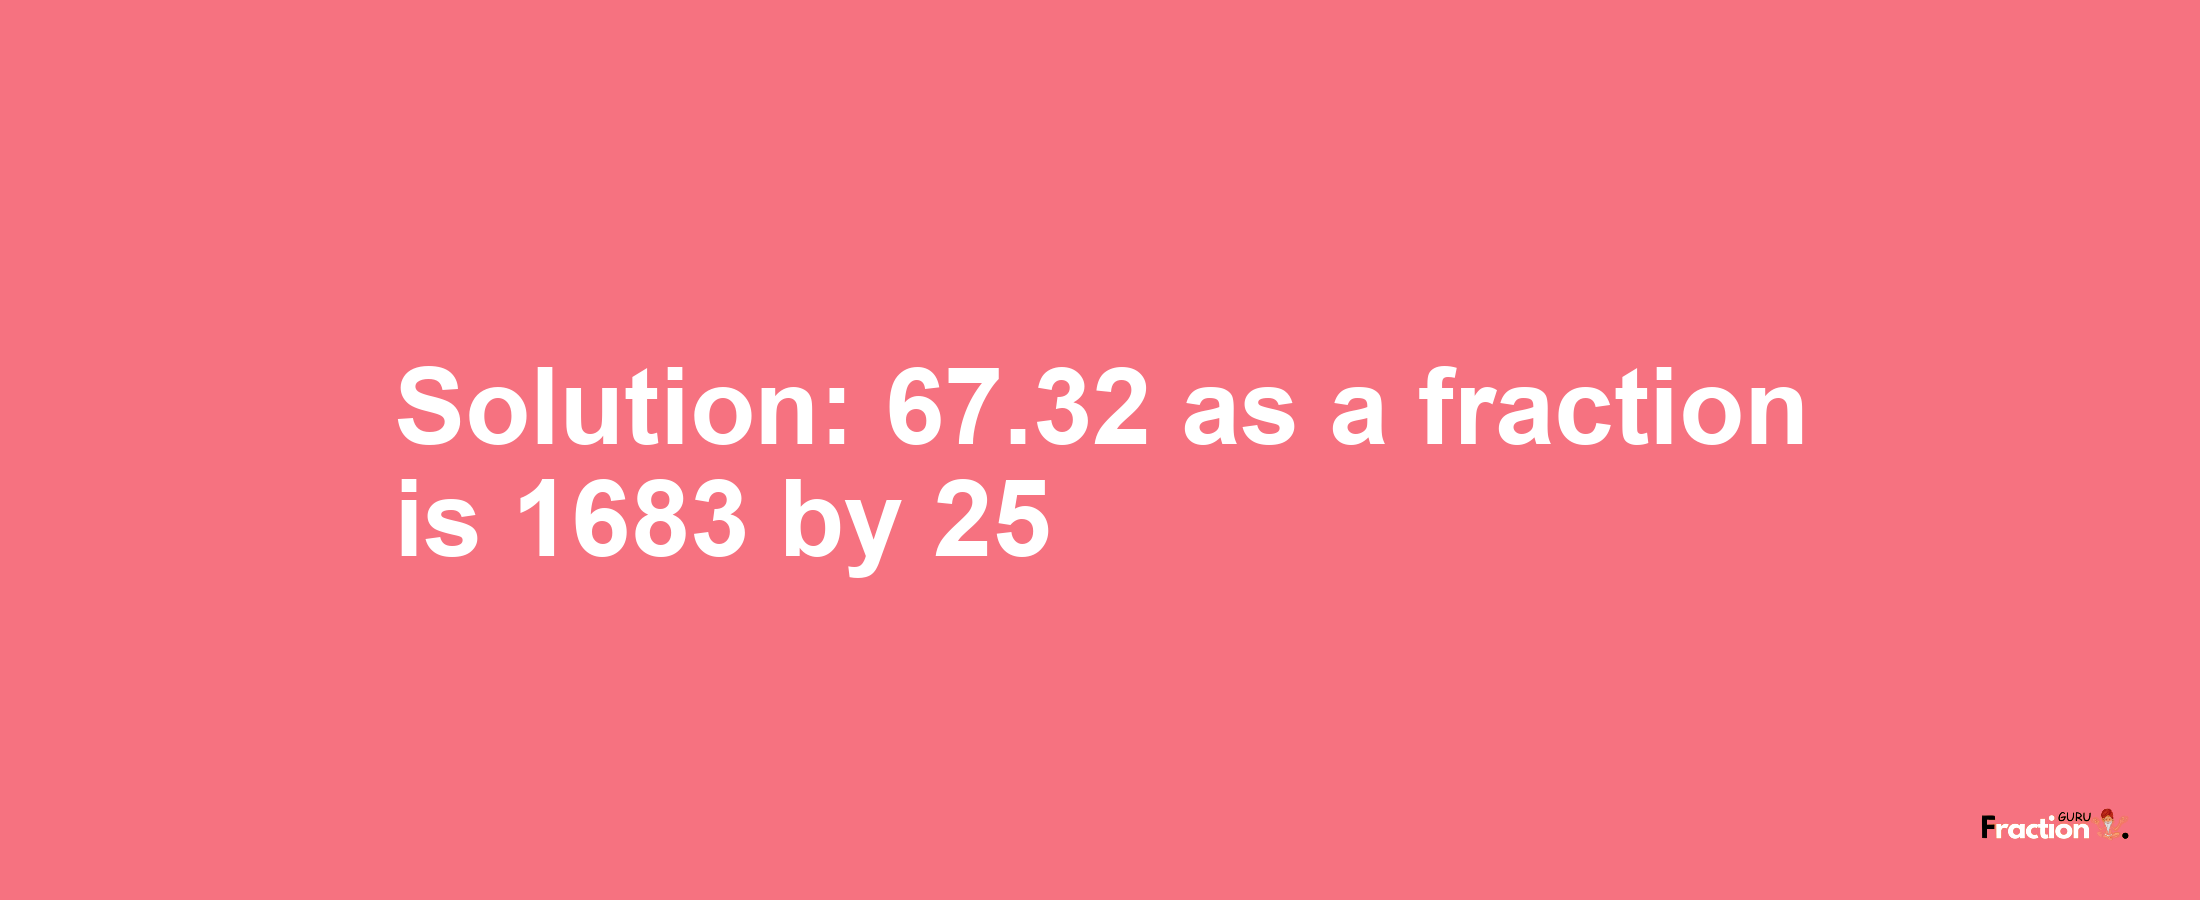 Solution:67.32 as a fraction is 1683/25